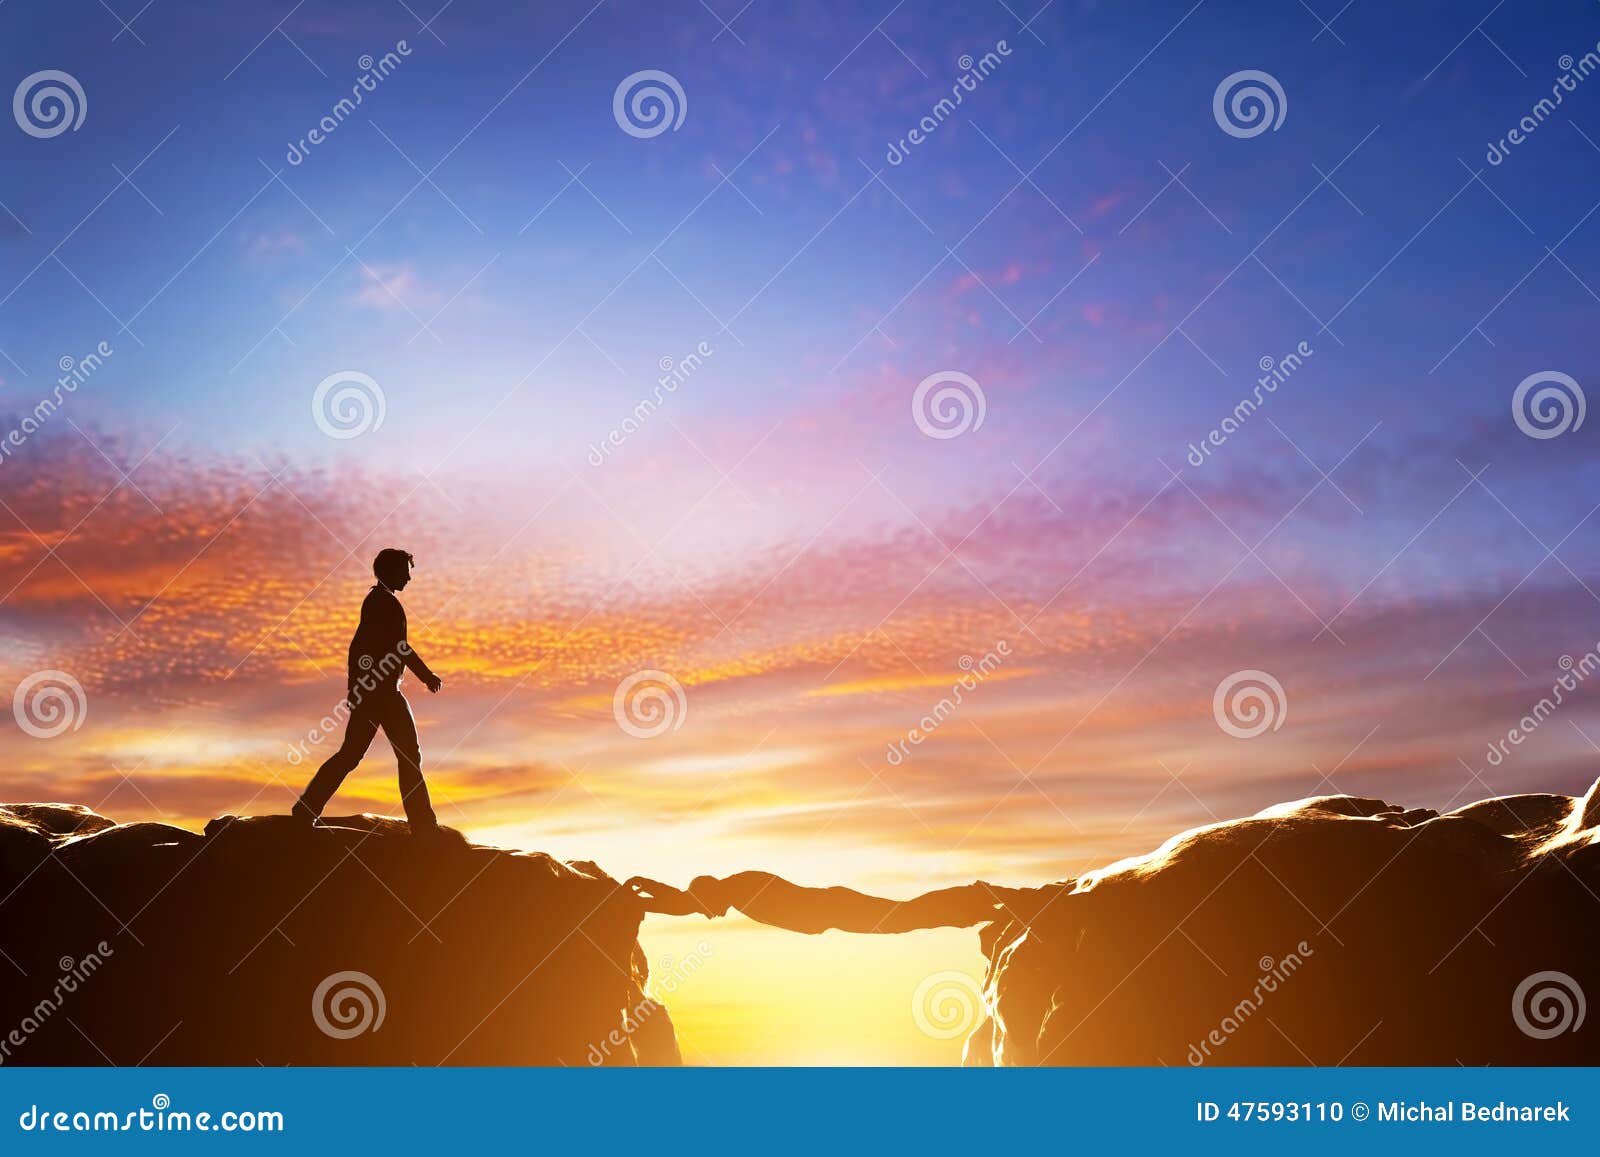 man about to croos precipice between mountains over another man